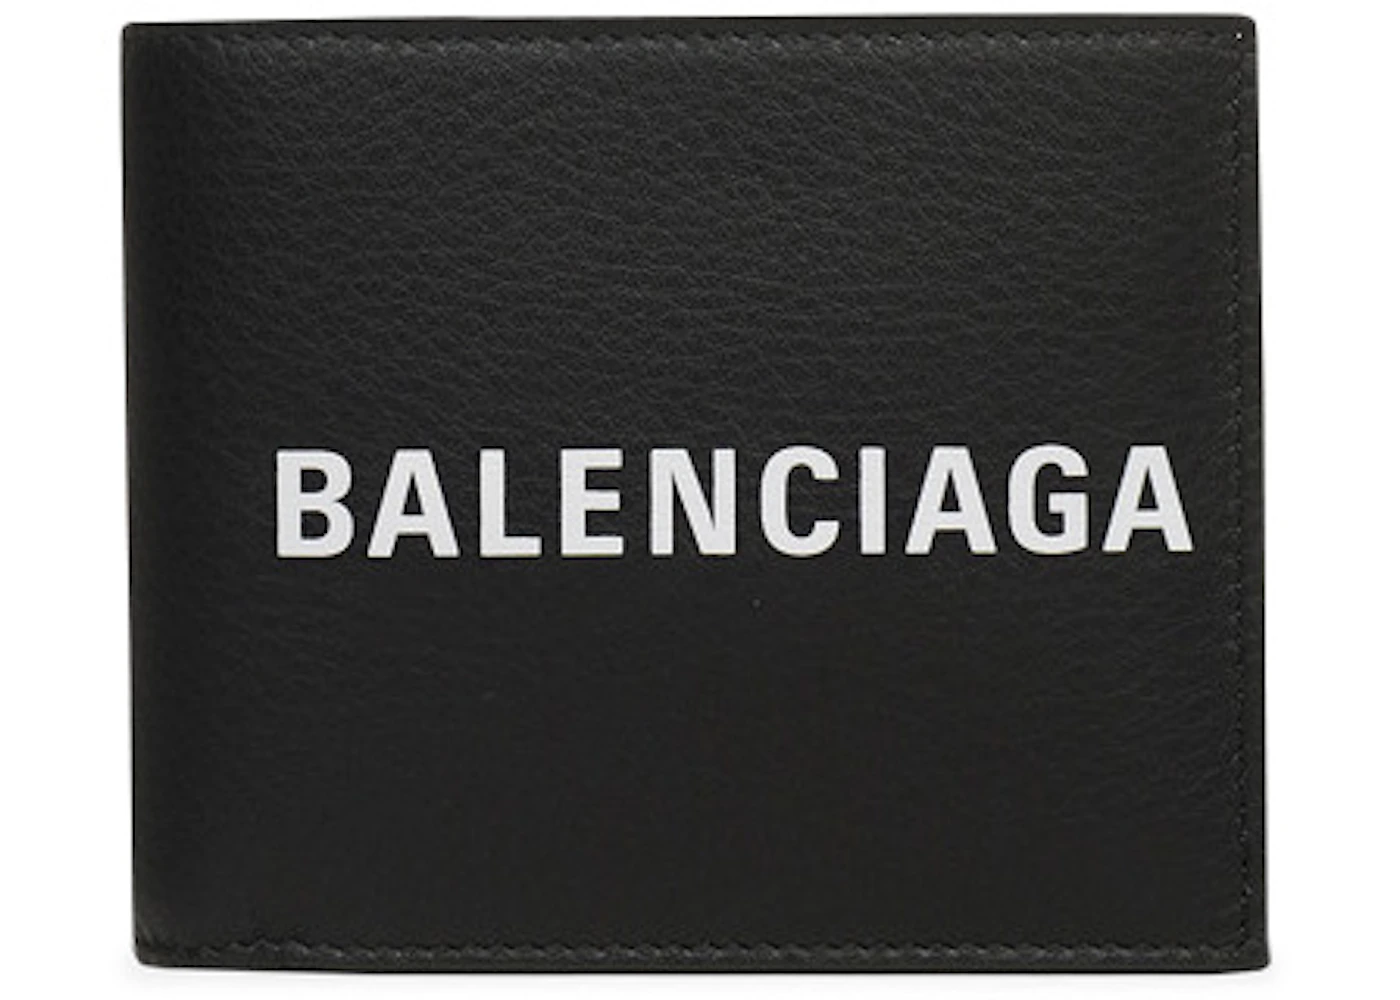 Balenciaga Everyday Square Wallet Black/White in Calfskin/Lambskin with ...